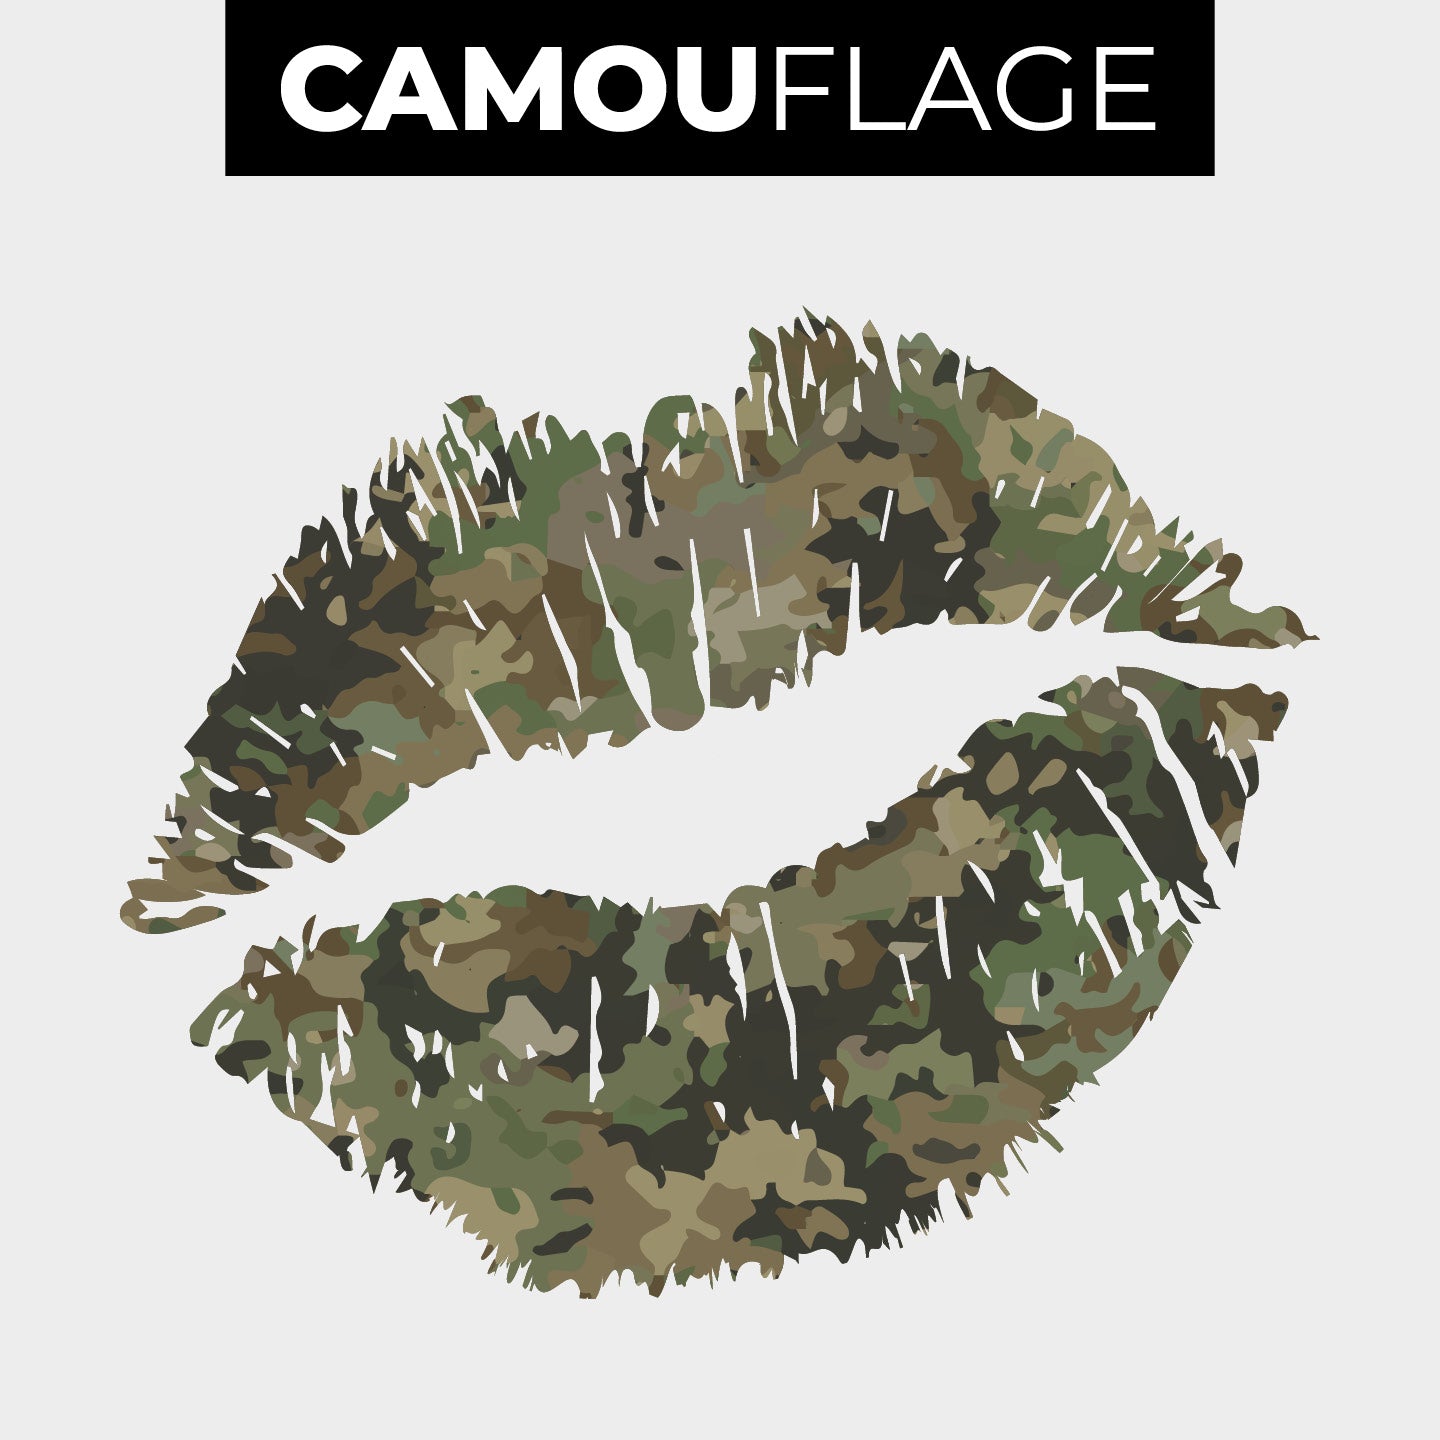 CAMOUFLAGE